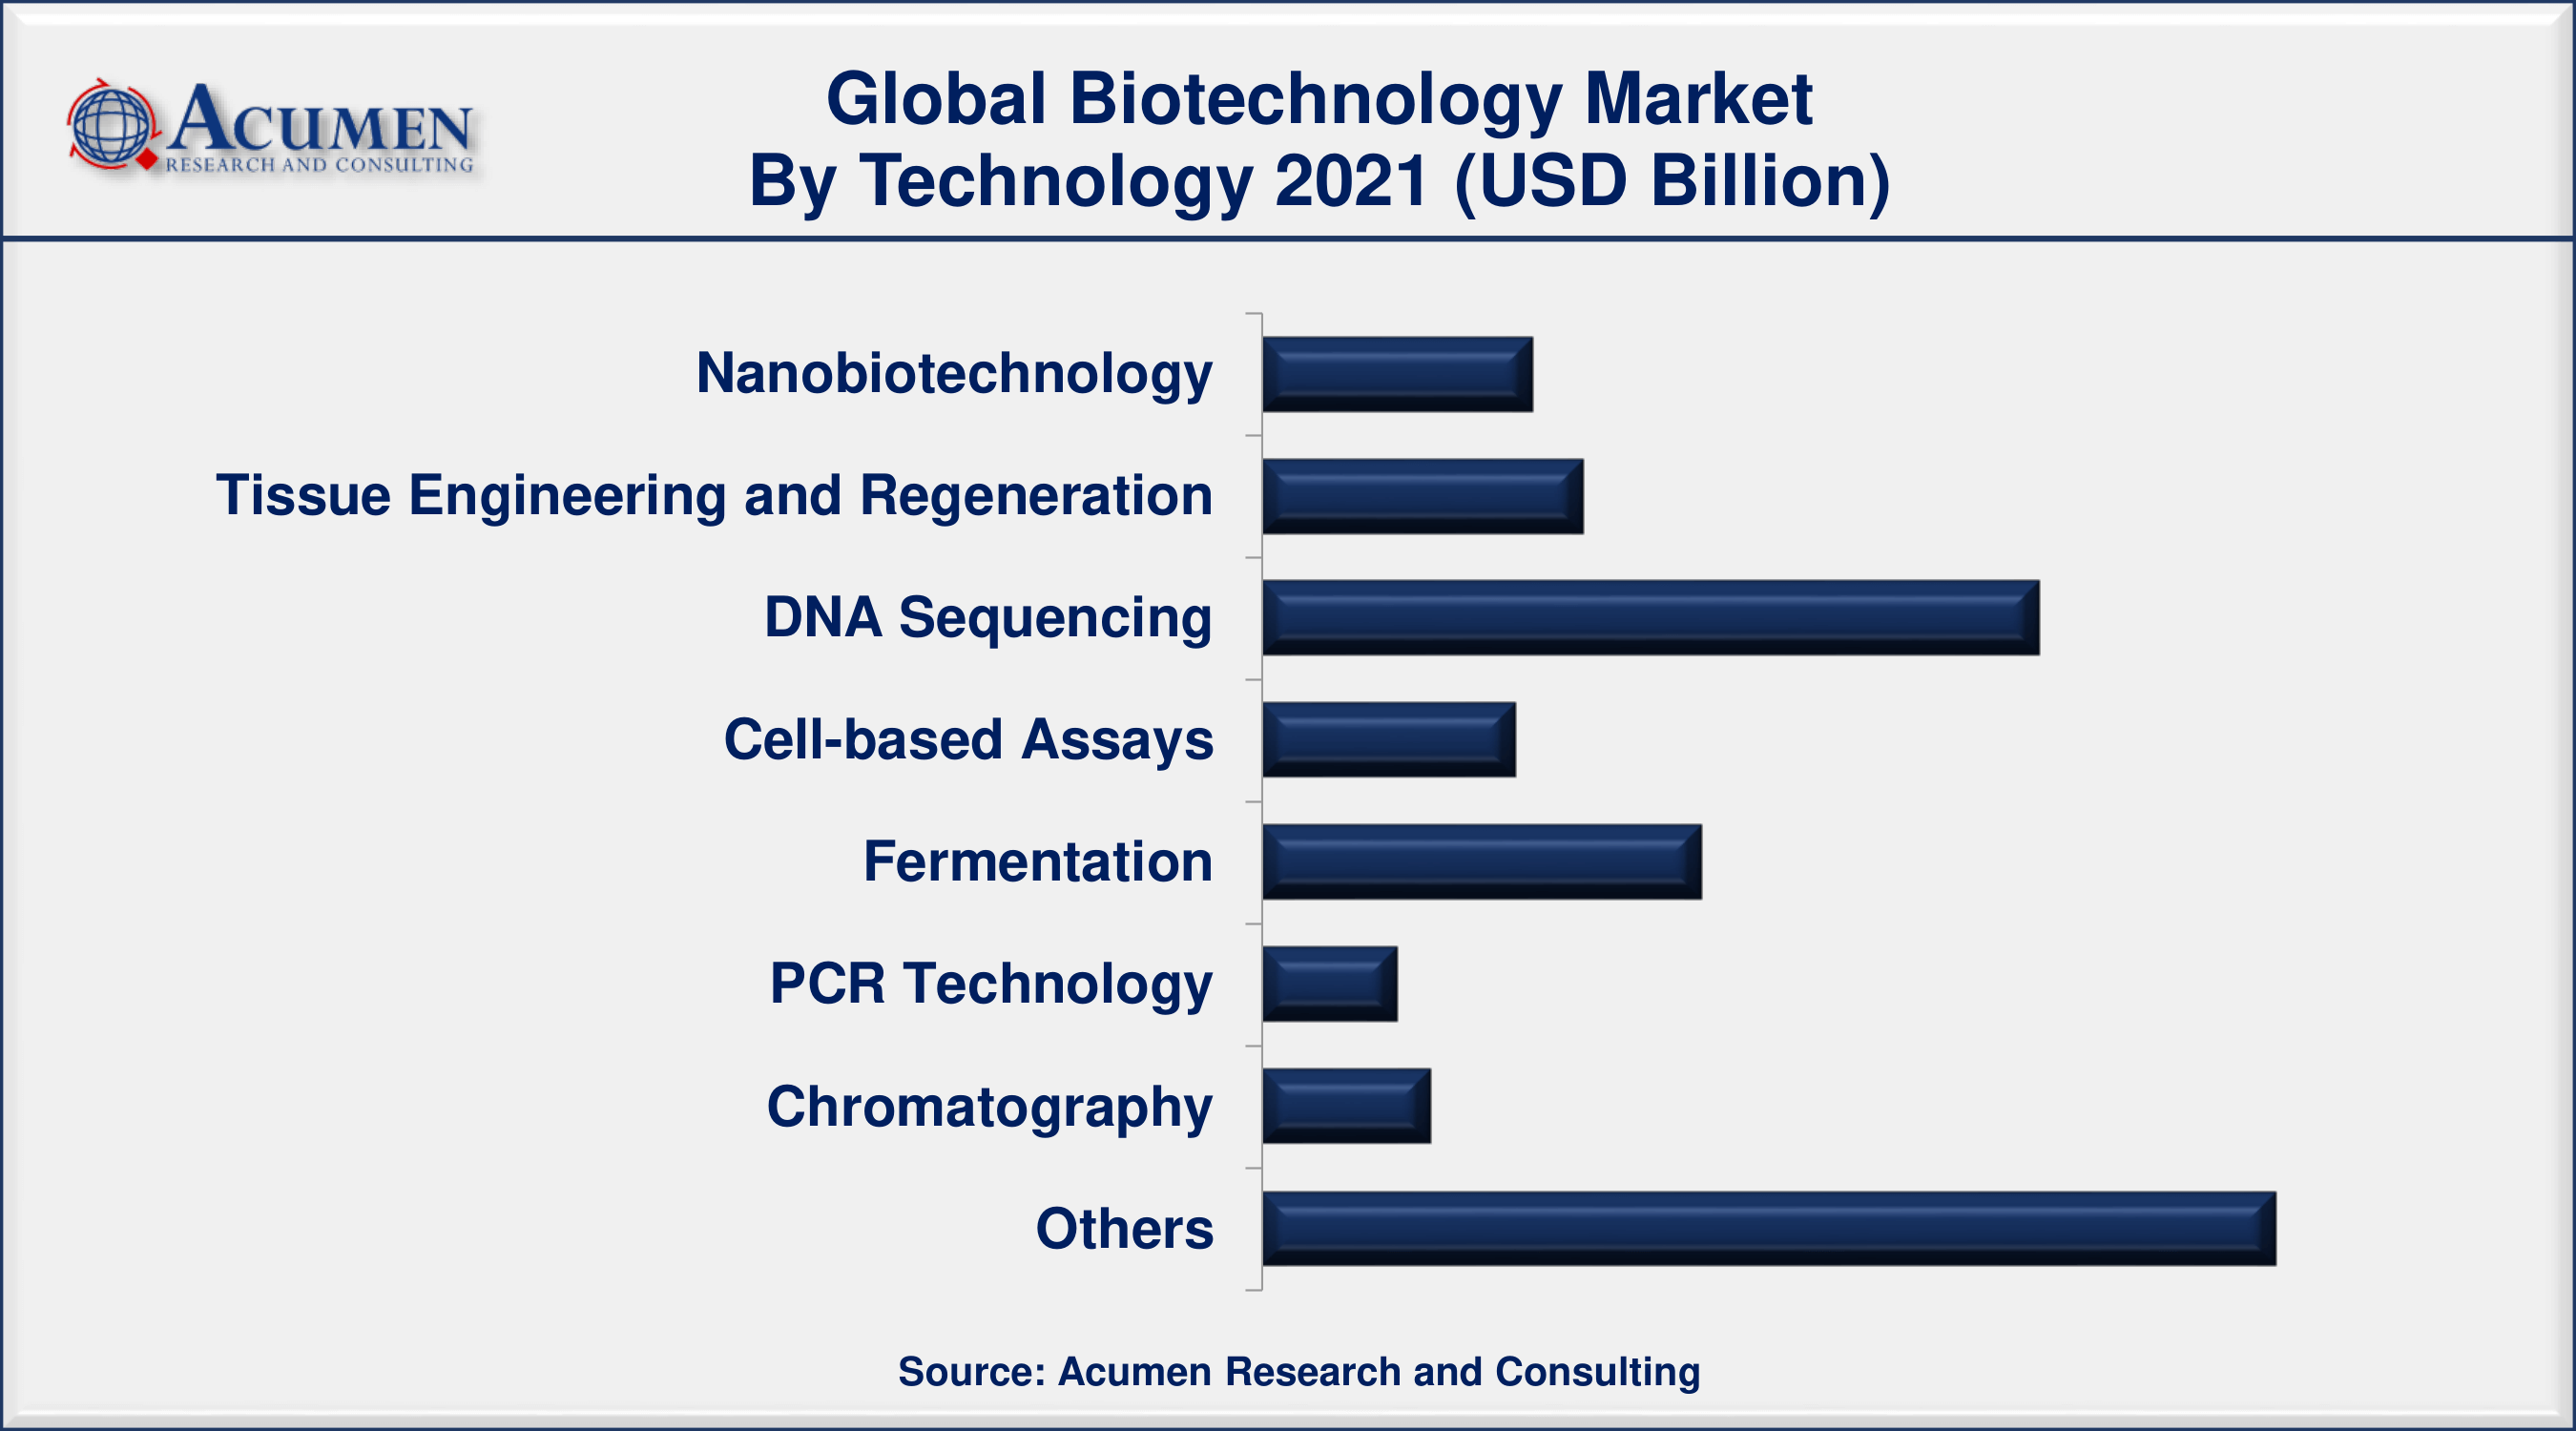 North America biotechnology market accounting for around 44% of the total market share in 2021